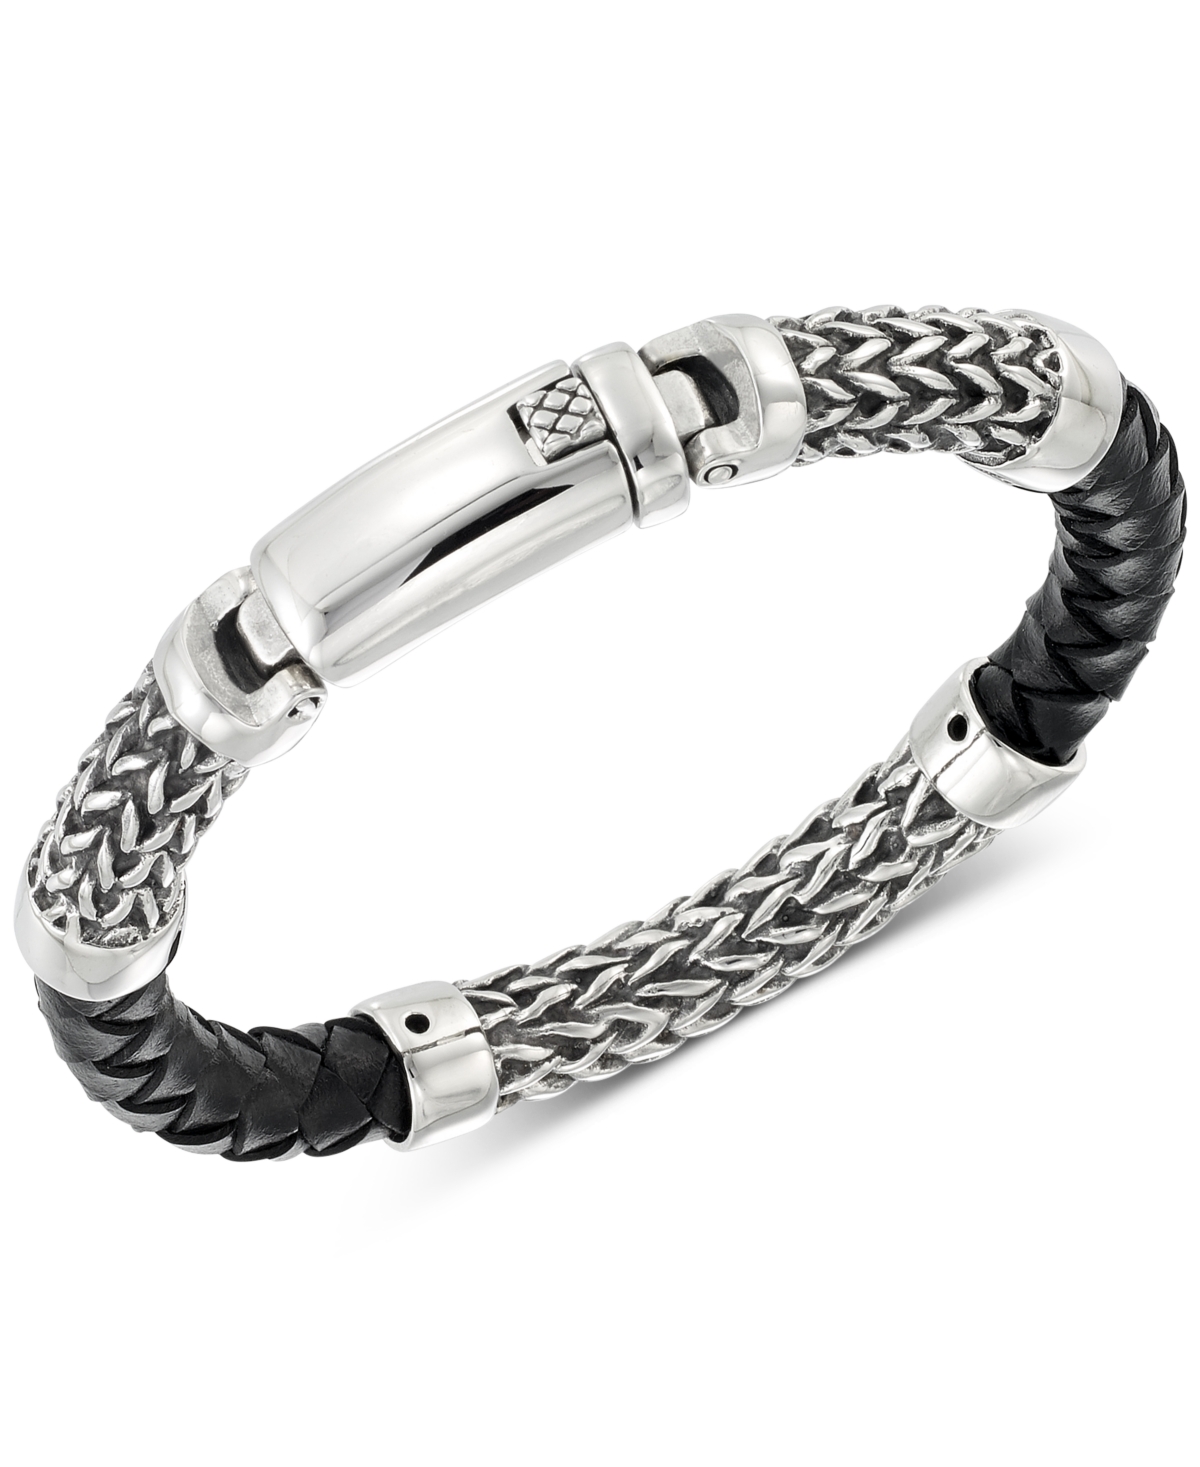 Legacy for Men by Simone I. Smith Black Leather Bracelet in Stainless Steel